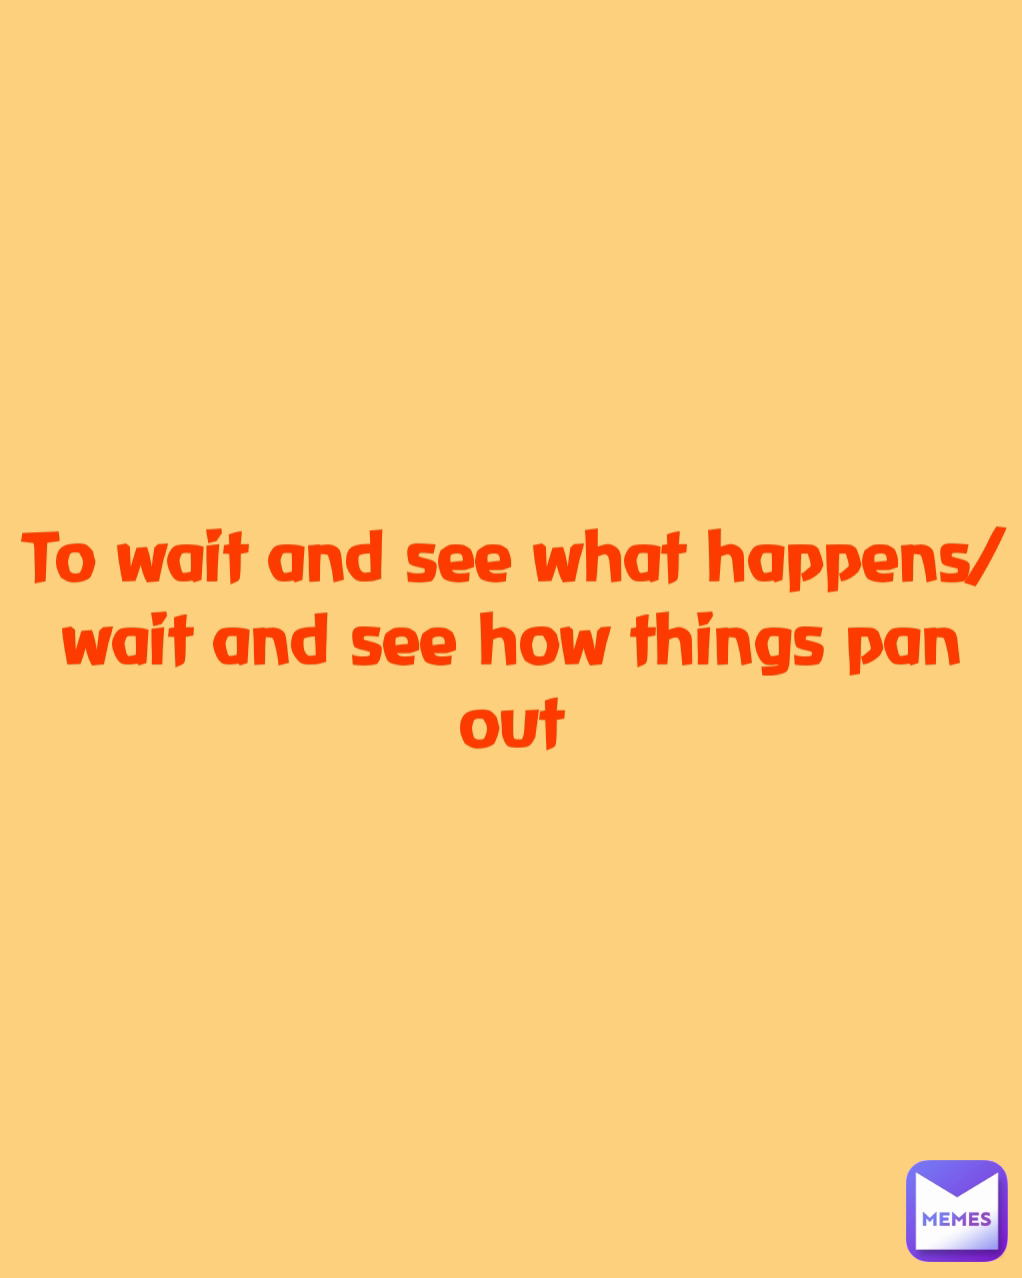 To wait and see what happens/wait and see how things pan out